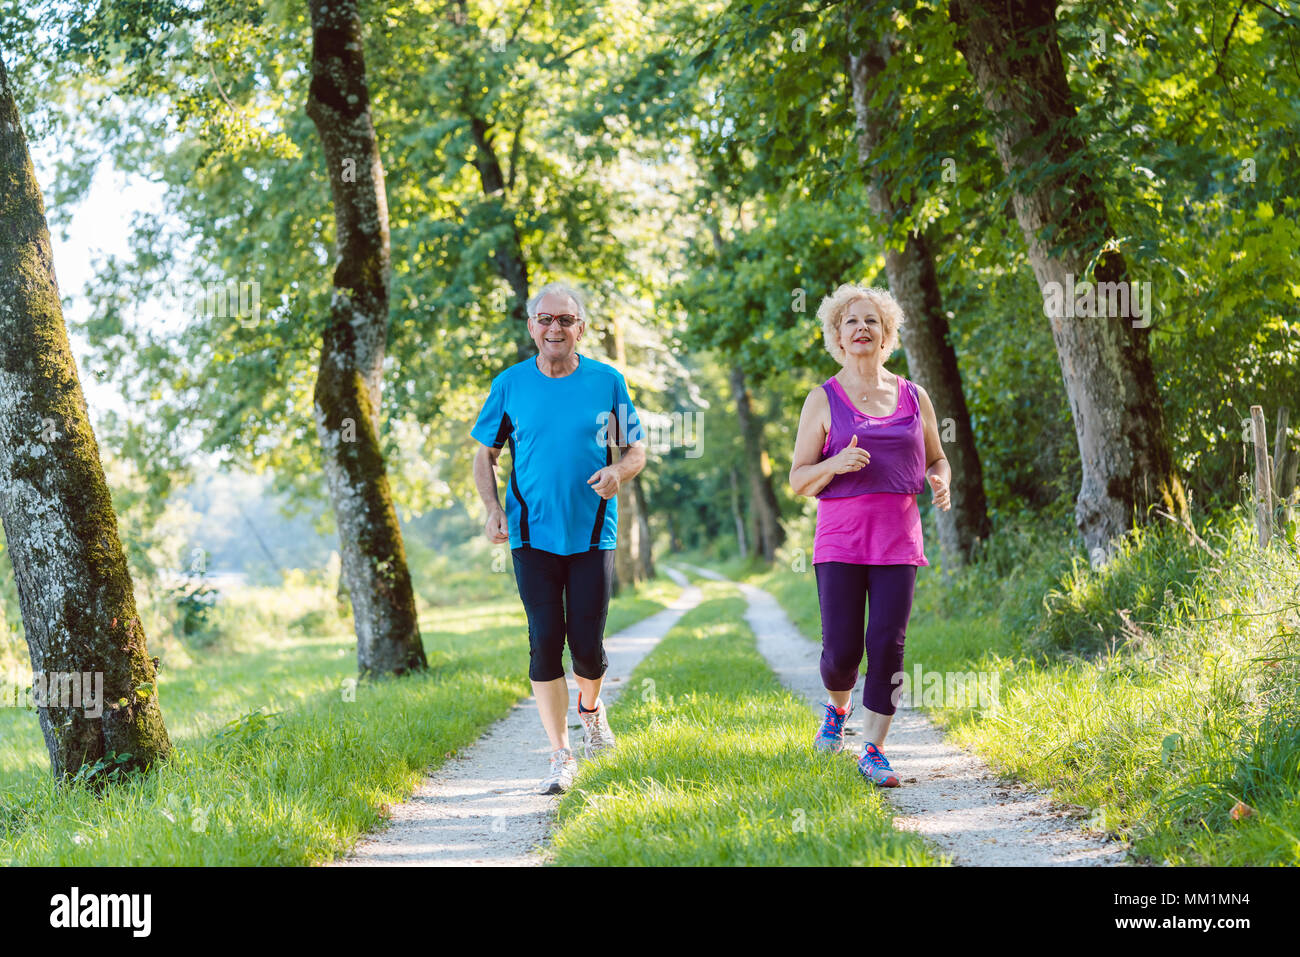 Two active seniors with a healthy lifestyle smiling while jogging together Stock Photo